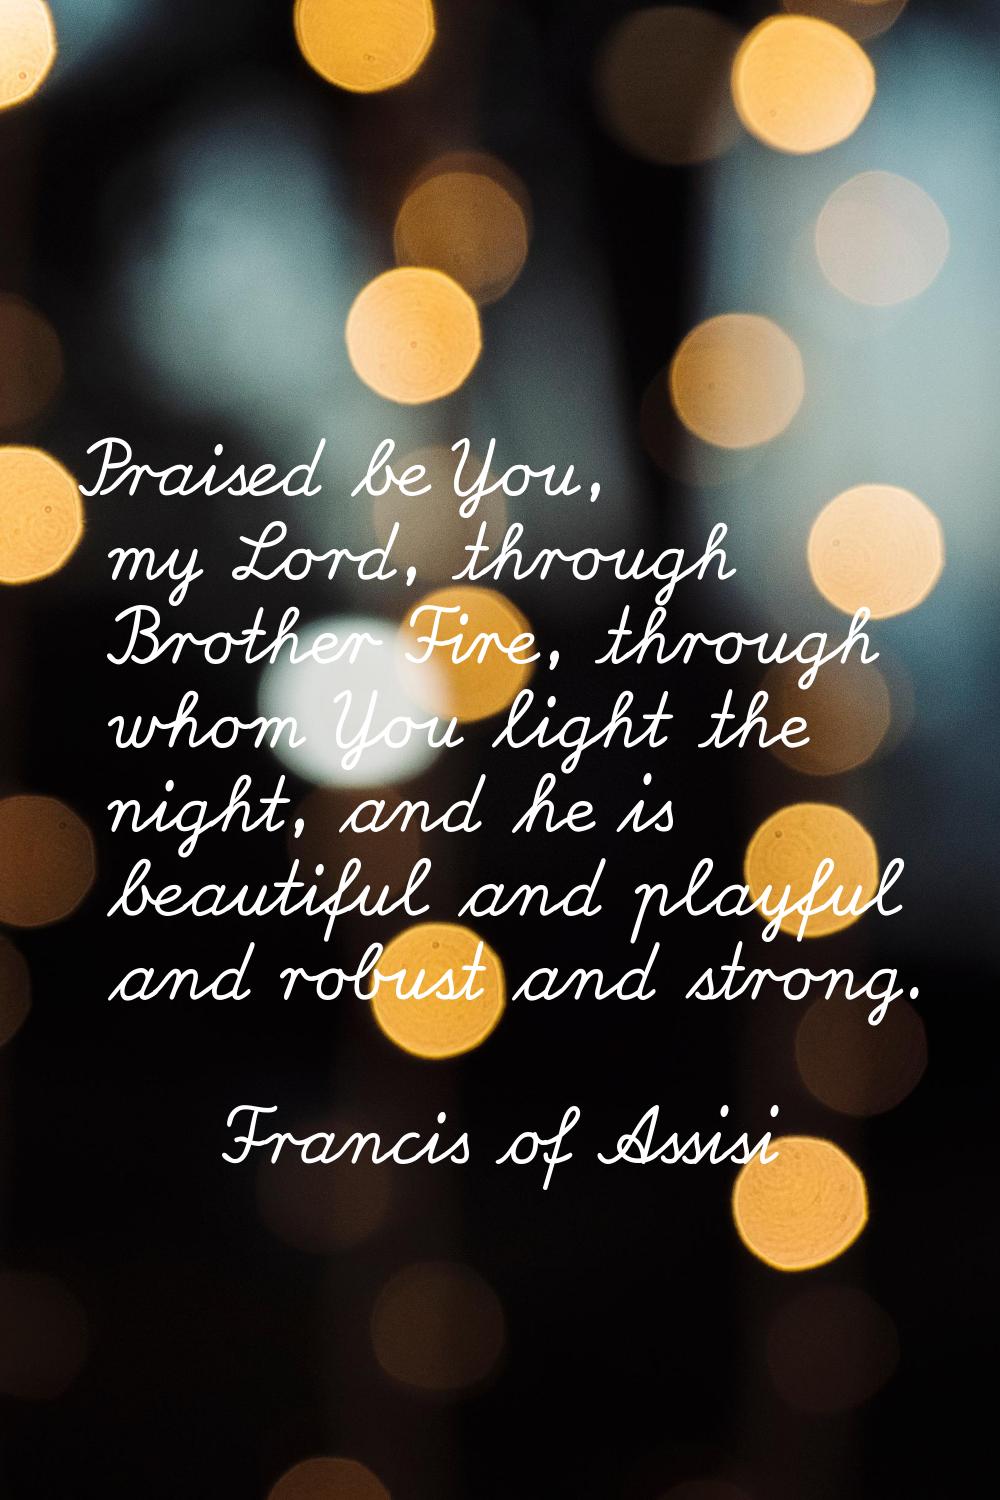 Praised be You, my Lord, through Brother Fire, through whom You light the night, and he is beautifu